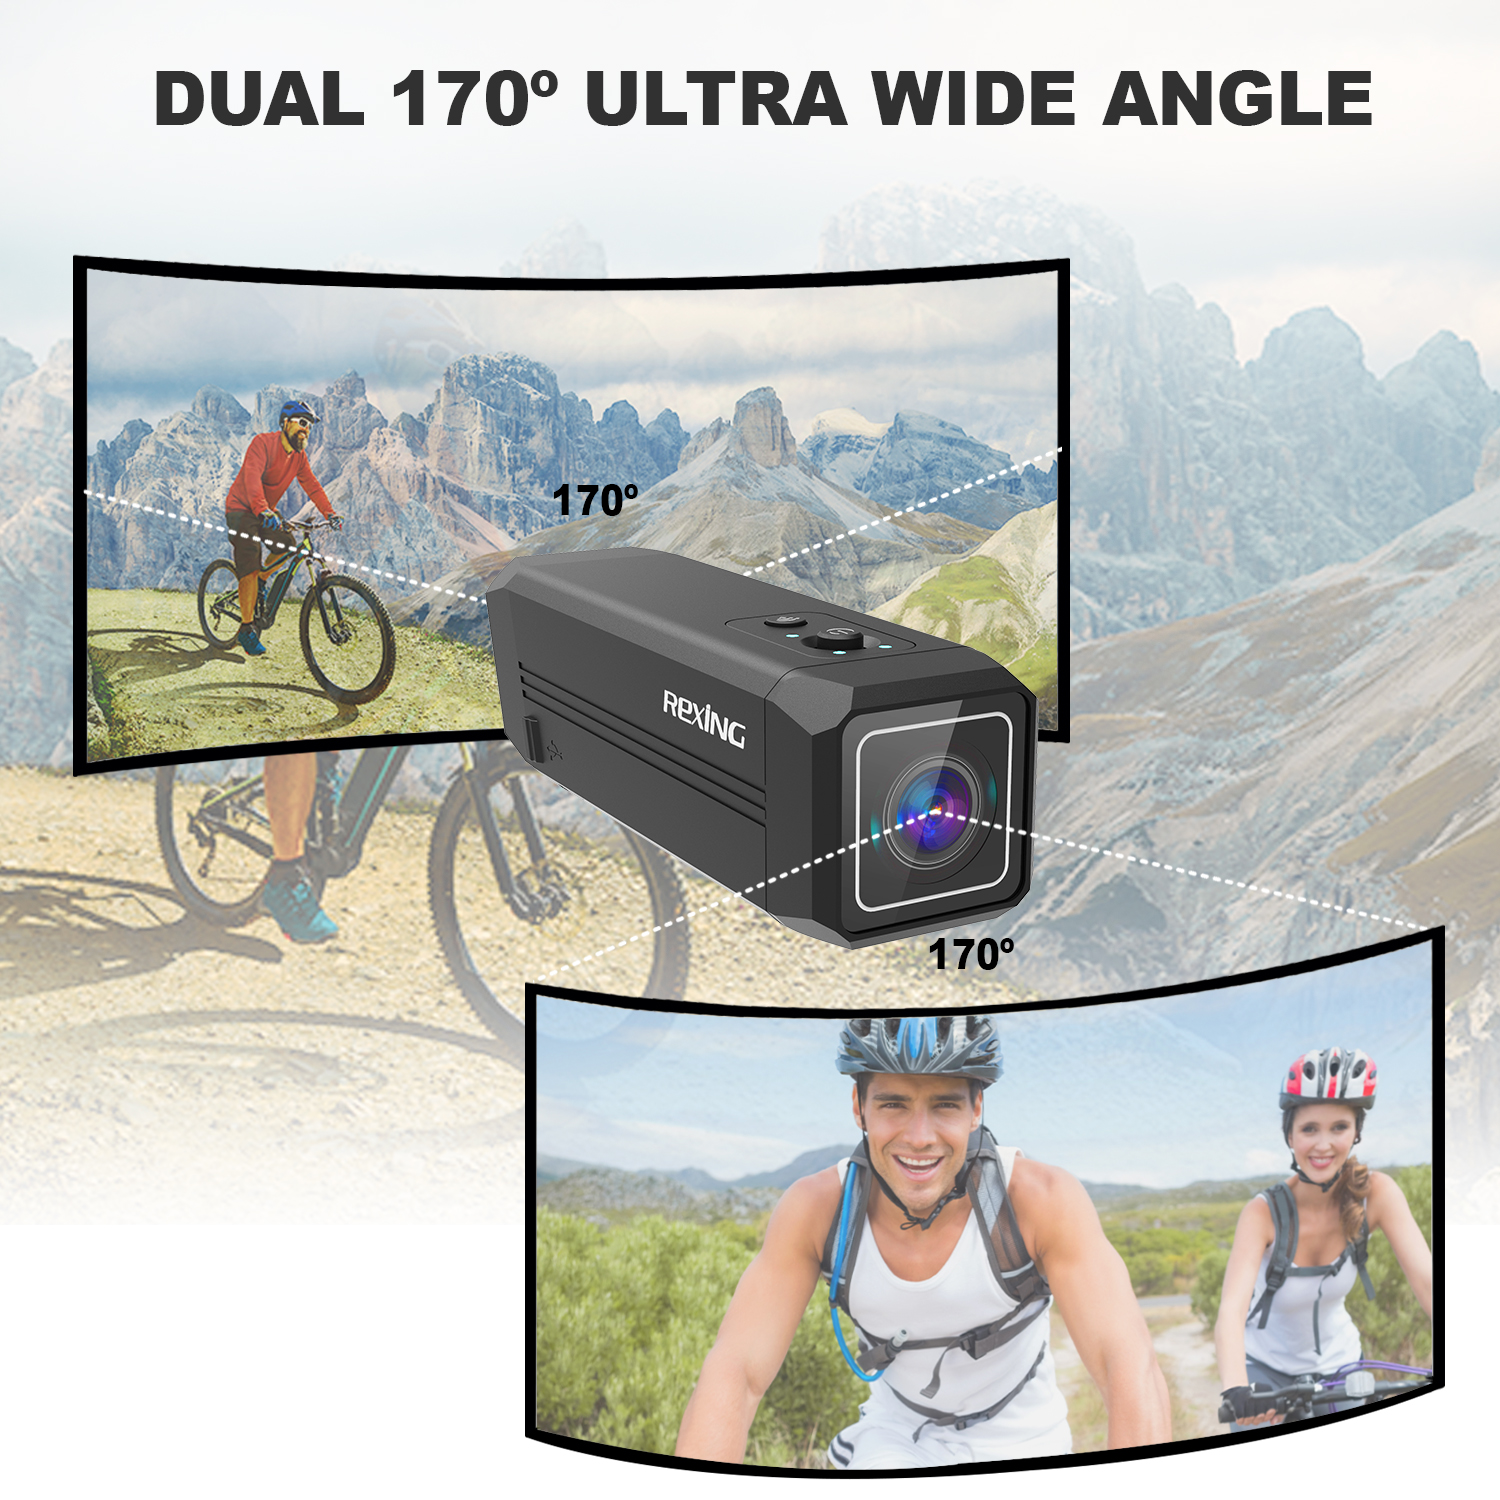 Rexing A1 Two Way Action Camera Front & Back 1080p@30fps With Wi-Fi Connect